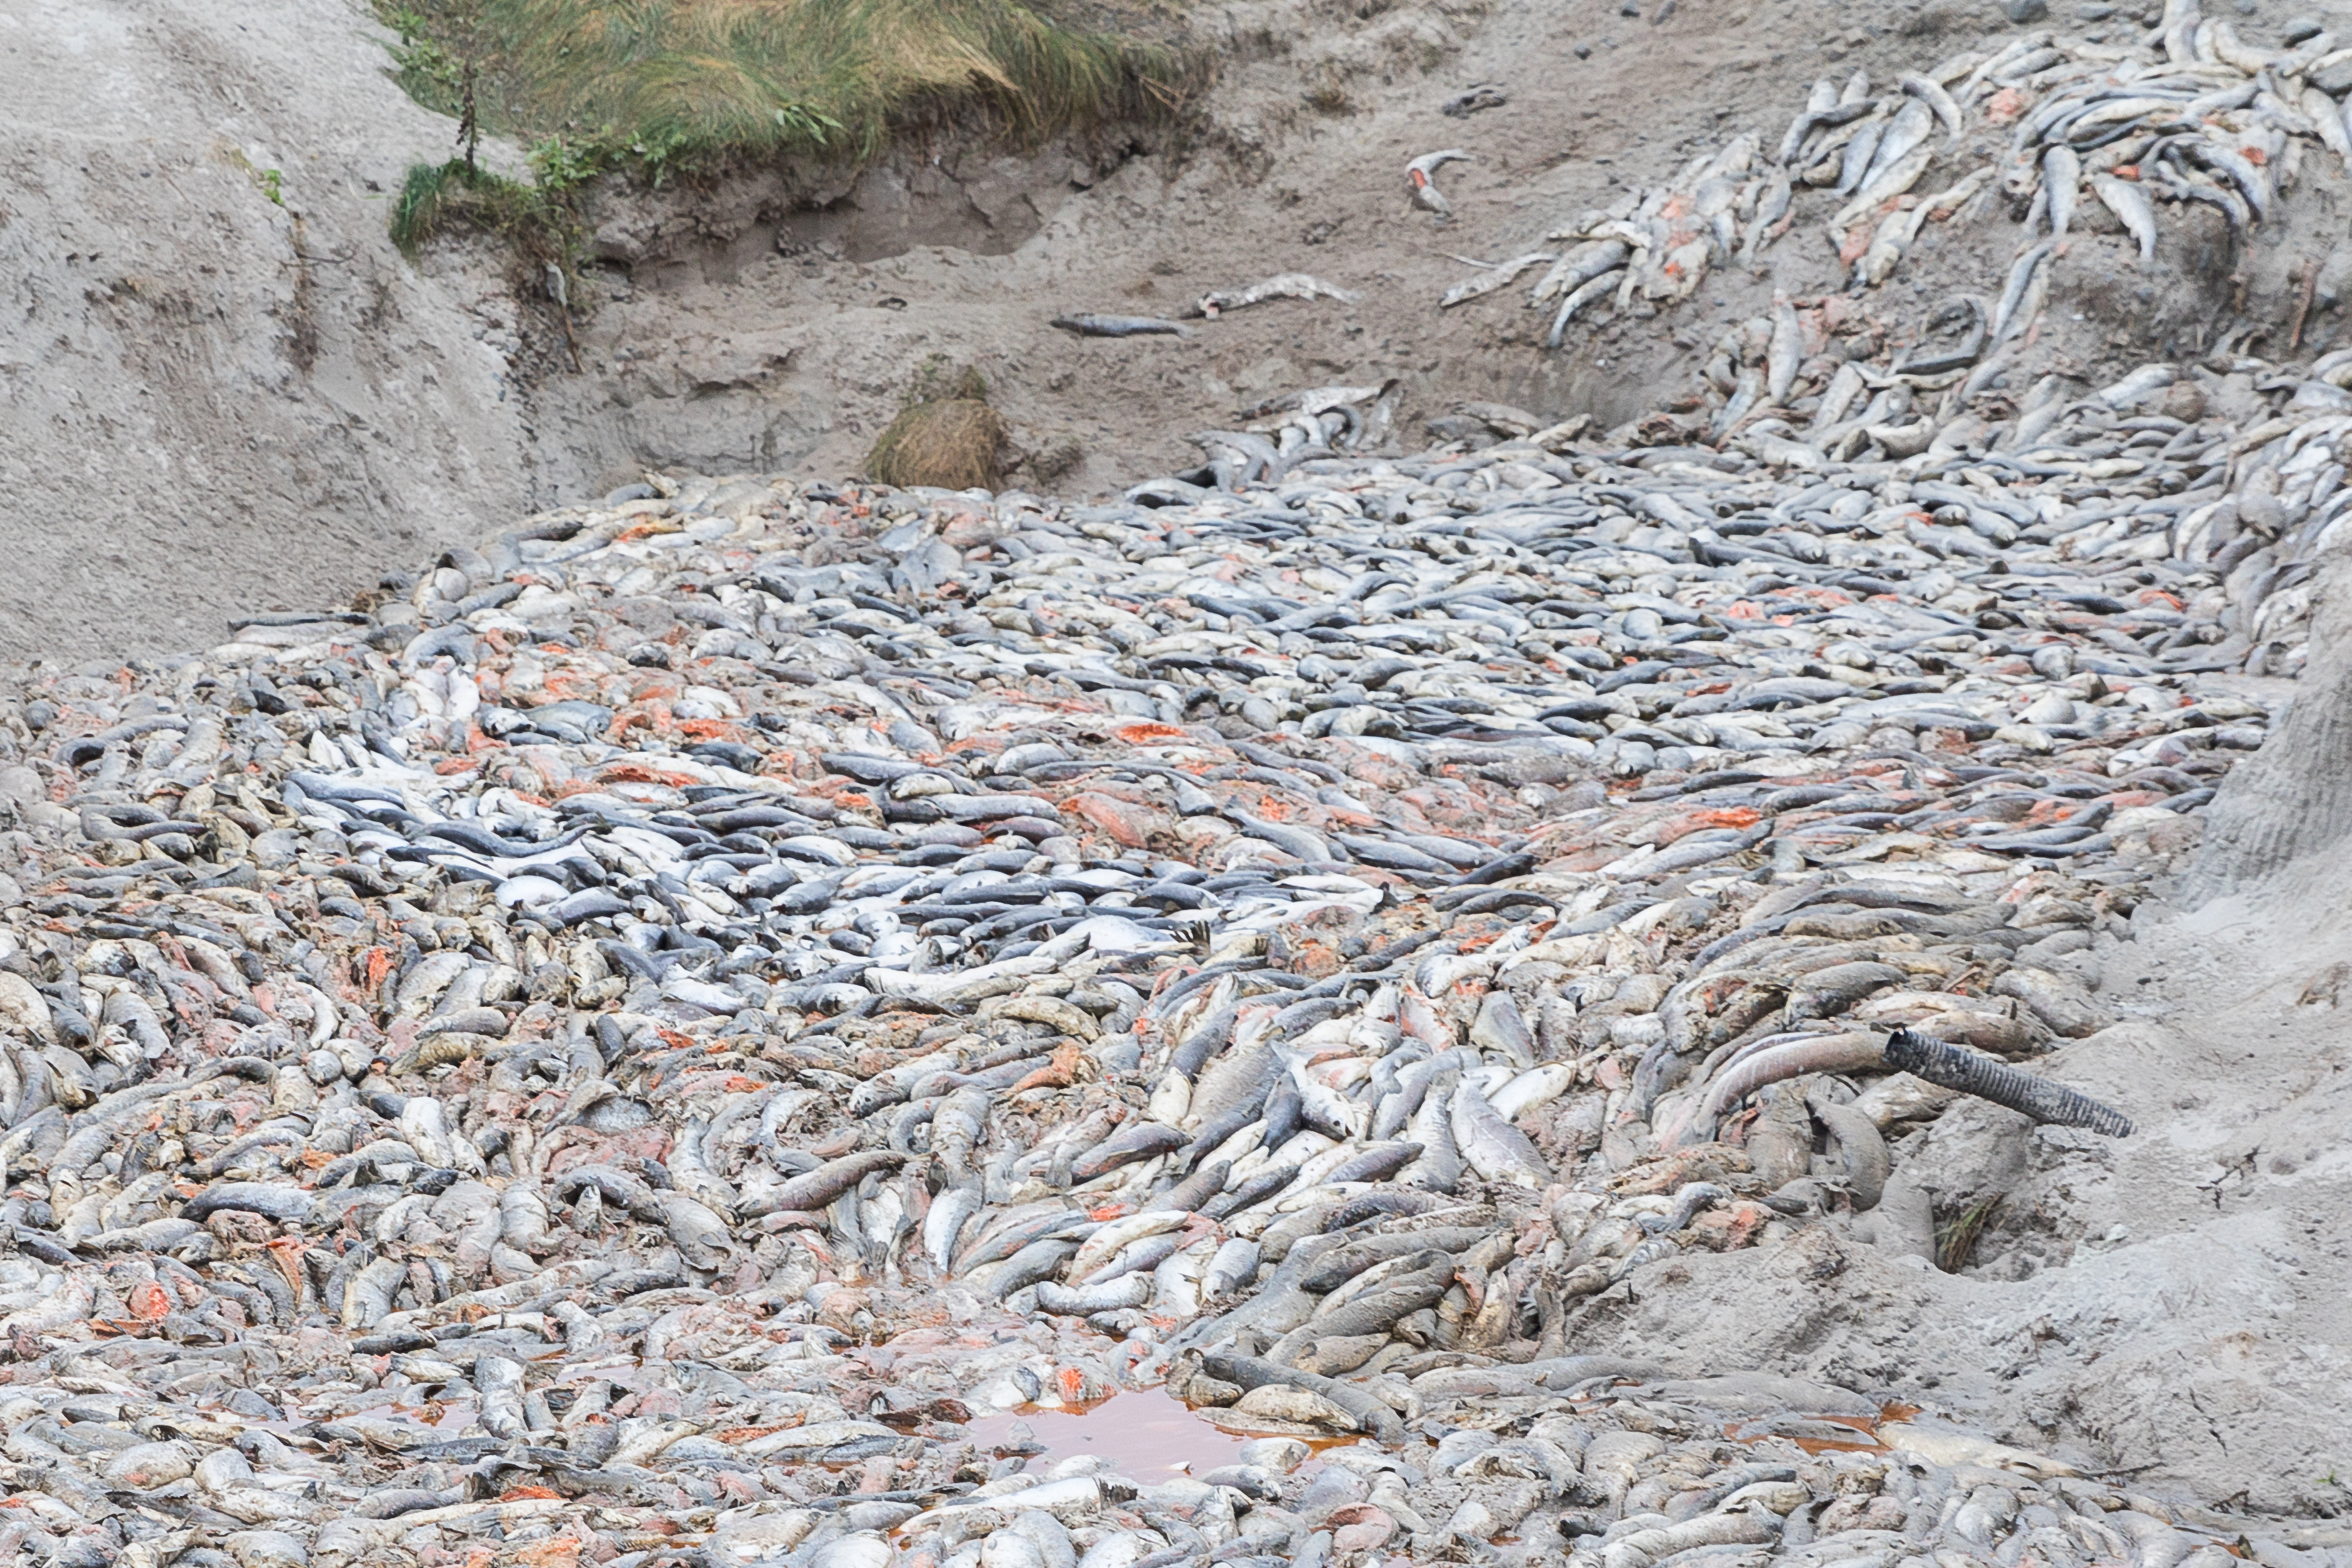 An enormous dump of millions of dead salmon by the fish farming industry in the north west of Scotland revealed this week.